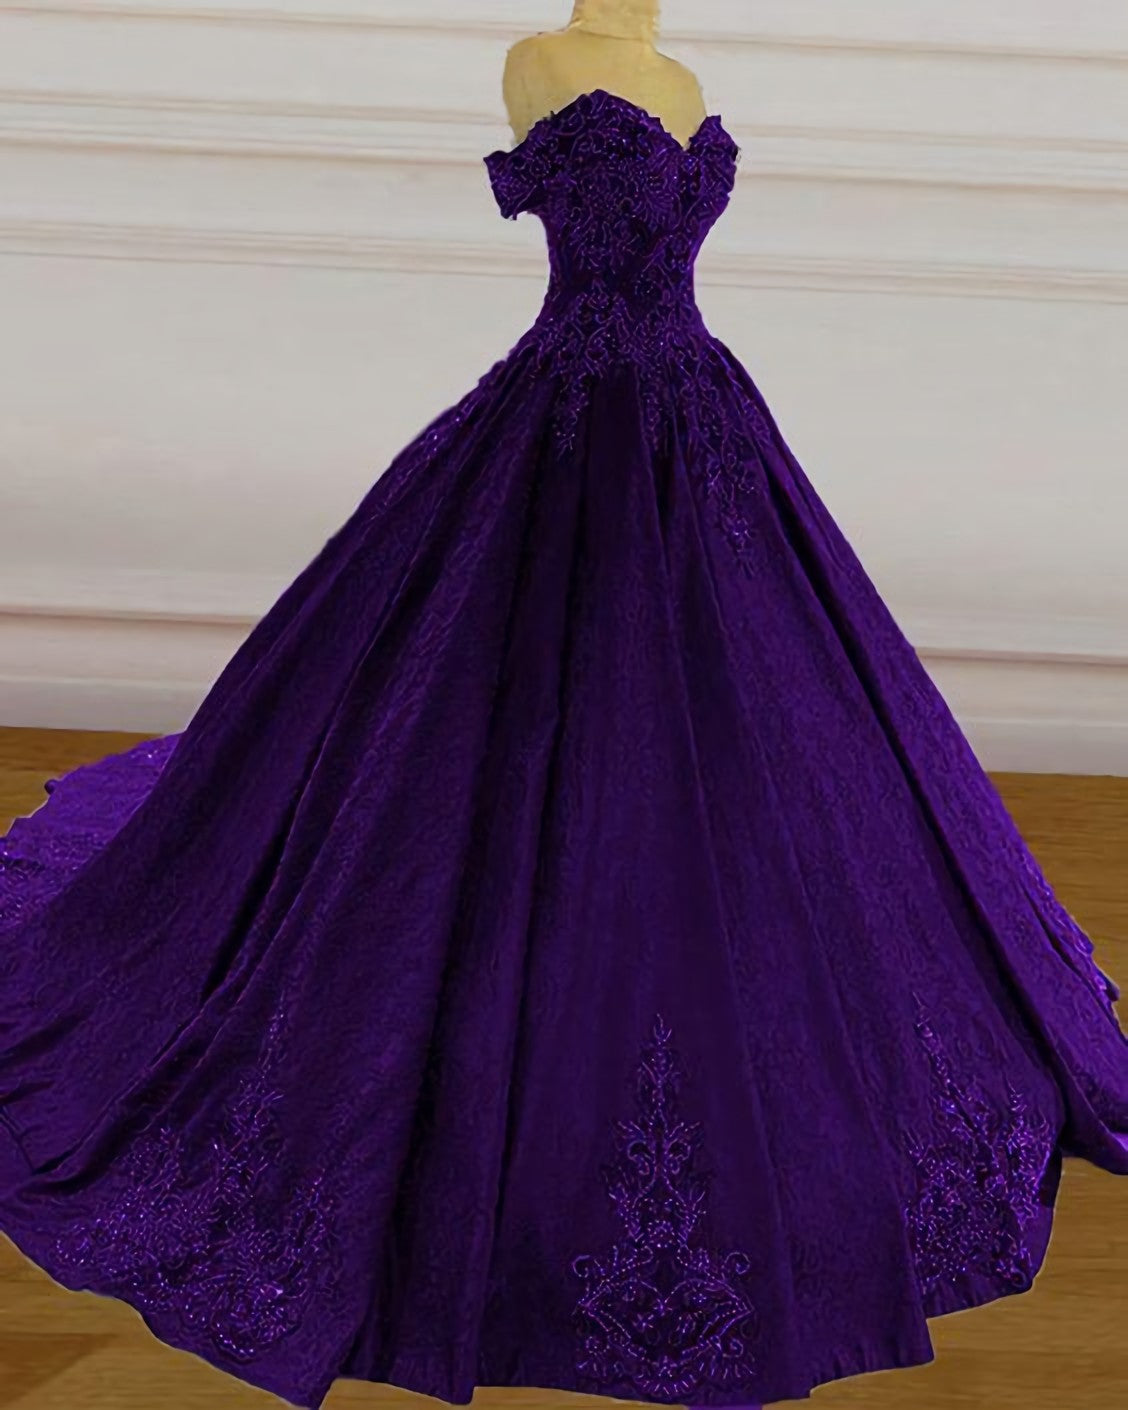 Wedding Dress Cheaper, Purple Wedding Dresses, Lace Ball Gown Prom Dress, Off The Shoulder For Women